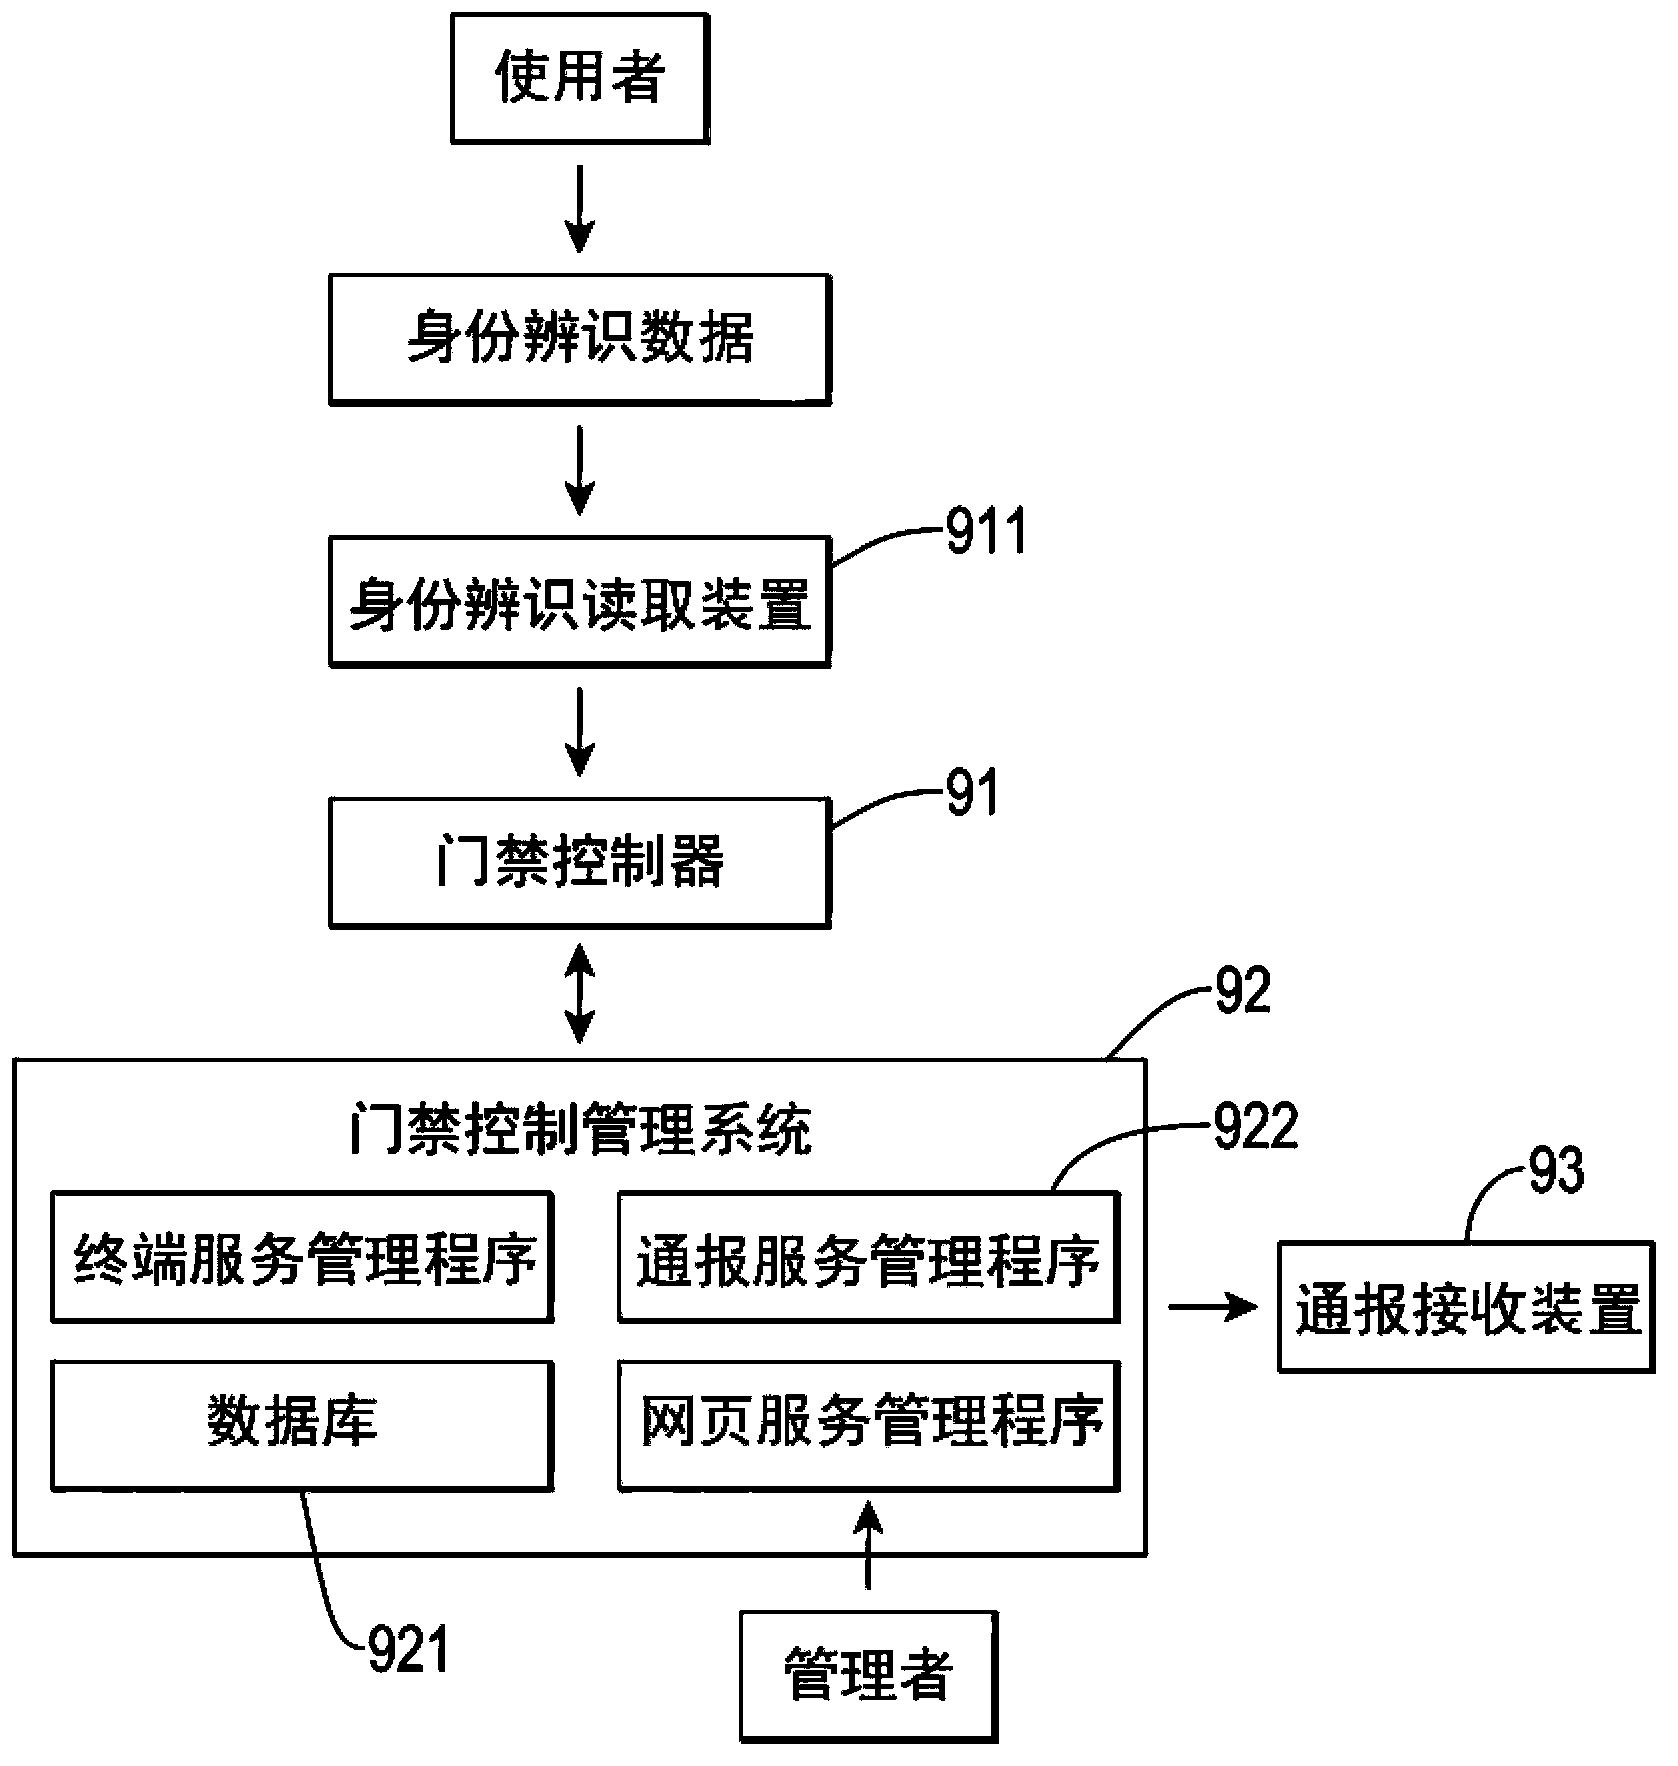 Cloud control the access control management system and the authentication method